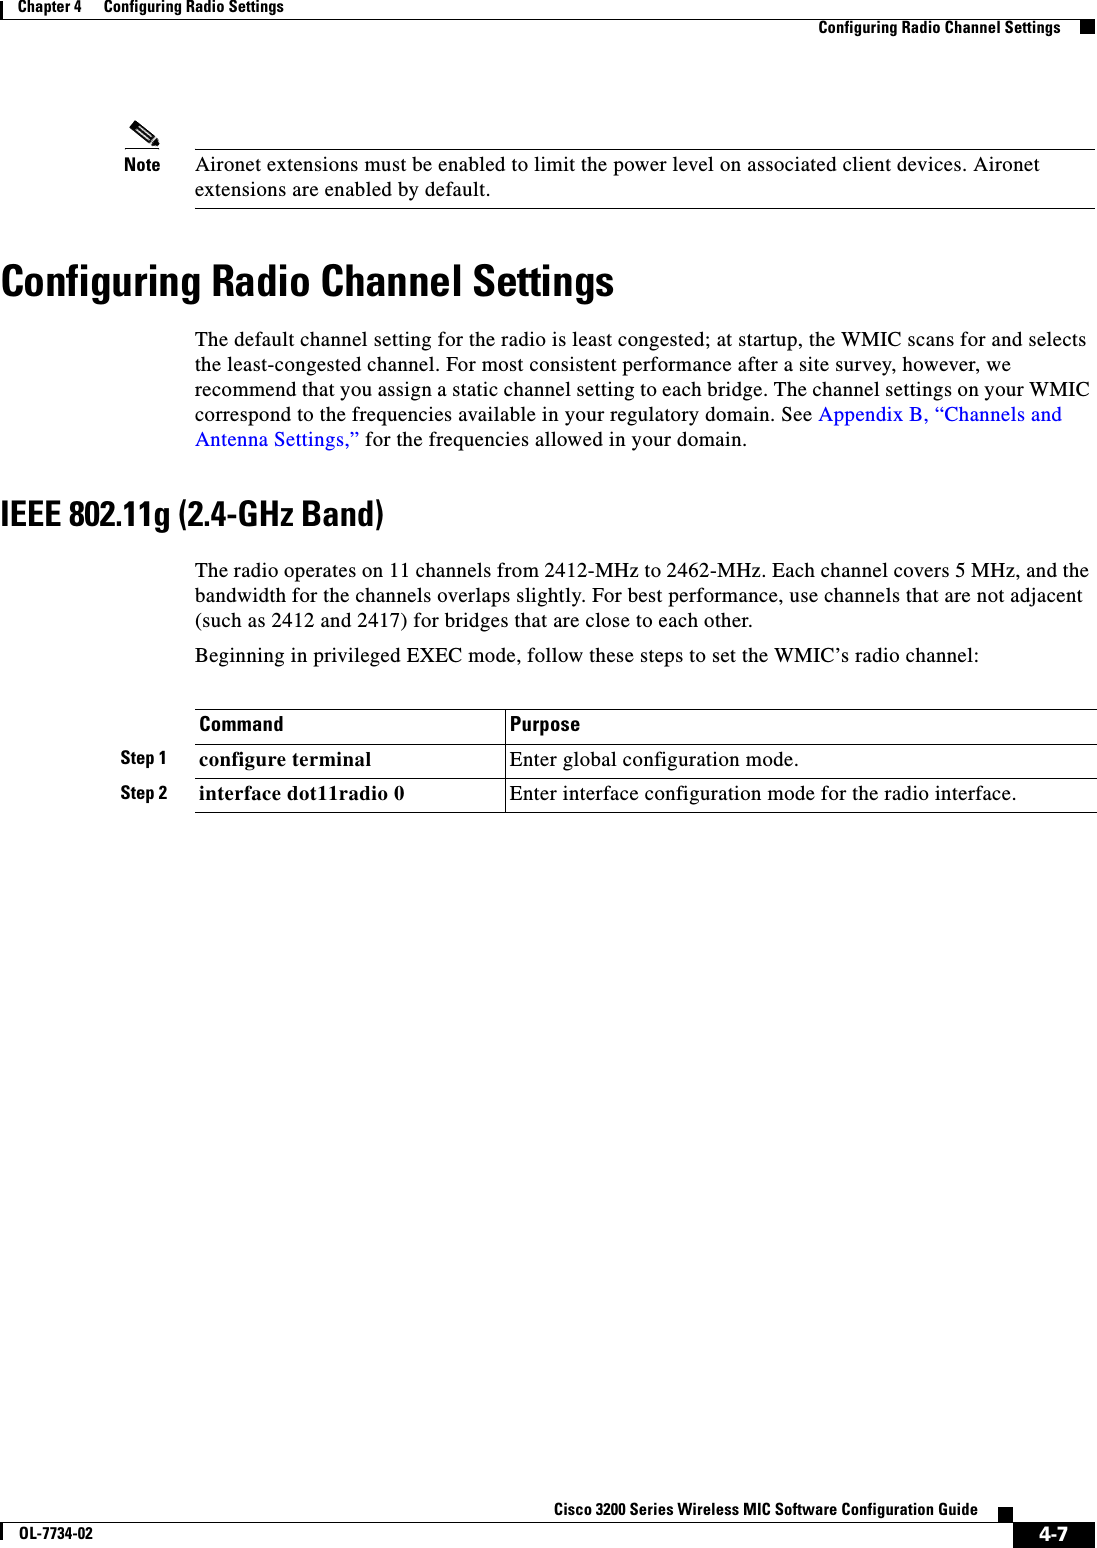 4-7Cisco 3200 Series Wireless MIC Software Configuration GuideOL-7734-02Chapter 4      Configuring Radio SettingsConfiguring Radio Channel SettingsNote Aironet extensions must be enabled to limit the power level on associated client devices. Aironet extensions are enabled by default.Configuring Radio Channel SettingsThe default channel setting for the radio is least congested; at startup, the WMIC scans for and selects the least-congested channel. For most consistent performance after a site survey, however, we recommend that you assign a static channel setting to each bridge. The channel settings on your WMIC correspond to the frequencies available in your regulatory domain. See Appendix B, “Channels and Antenna Settings,” for the frequencies allowed in your domain.IEEE 802.11g (2.4-GHz Band)The radio operates on 11 channels from 2412-MHz to 2462-MHz. Each channel covers 5 MHz, and the bandwidth for the channels overlaps slightly. For best performance, use channels that are not adjacent (such as 2412 and 2417) for bridges that are close to each other. Beginning in privileged EXEC mode, follow these steps to set the WMIC’s radio channel:Command PurposeStep 1 configure terminal Enter global configuration mode.Step 2 interface dot11radio 0 Enter interface configuration mode for the radio interface. 